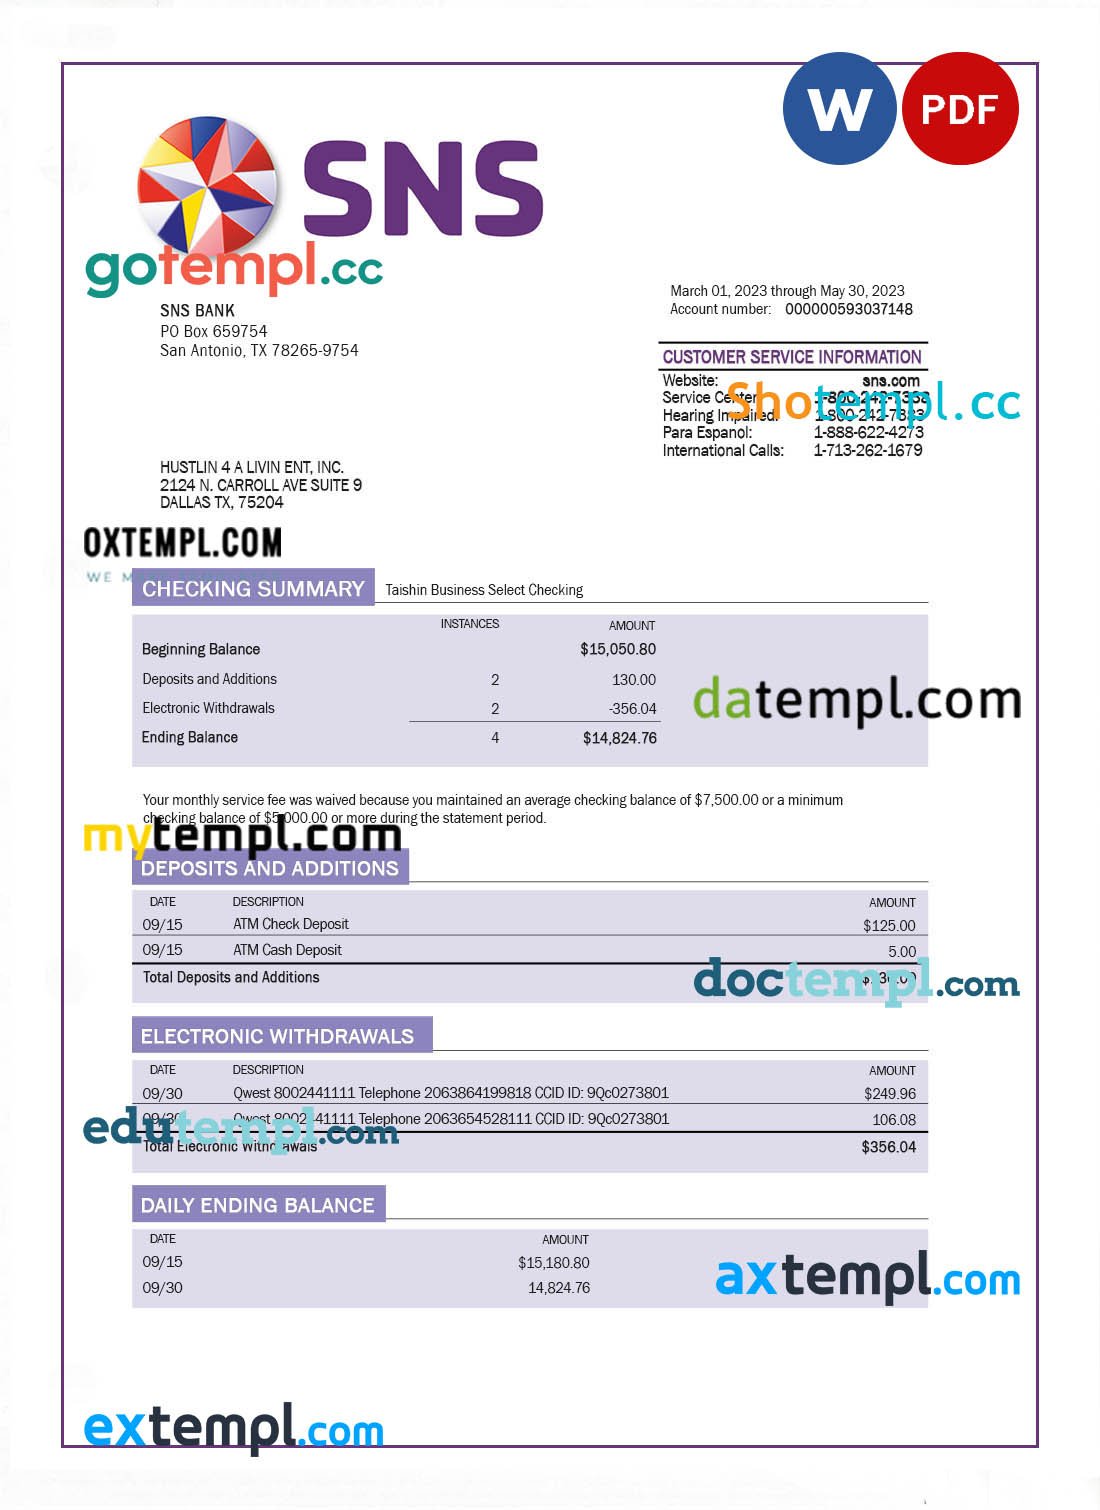 SNS Bank enterprise account statement Word and PDF template